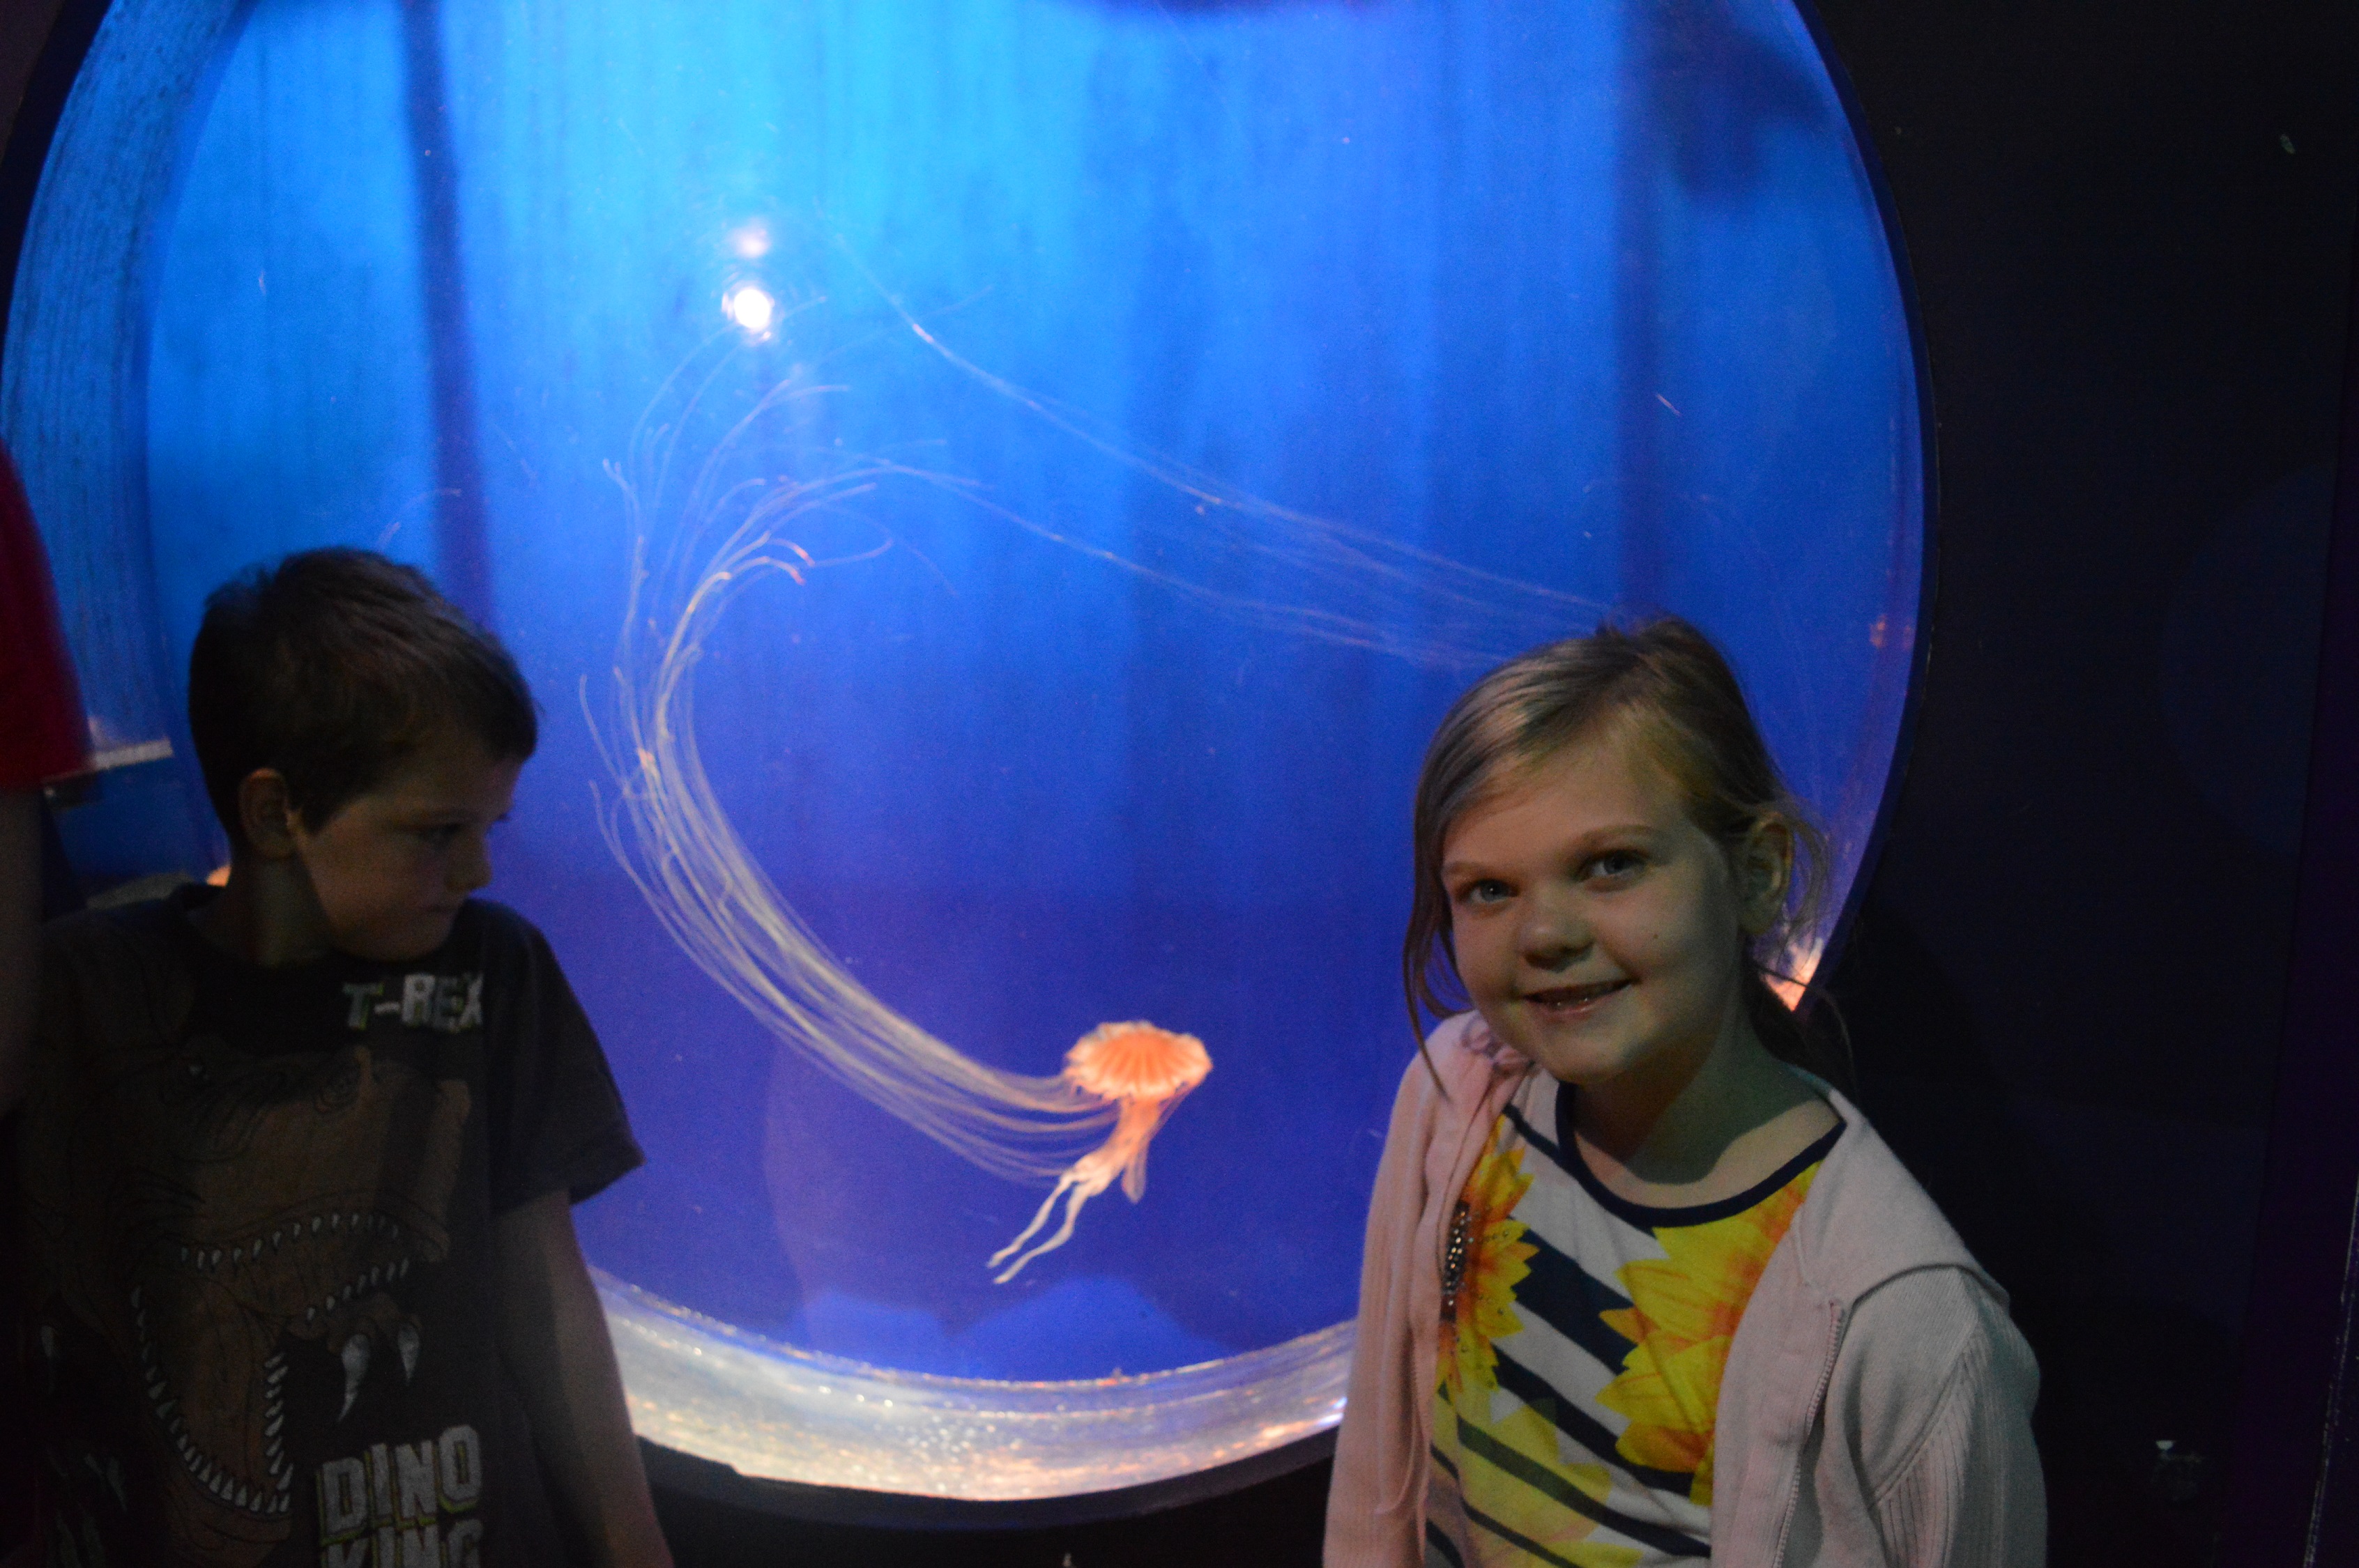 Kaide and Eowyn stood next to the jellyfish tank